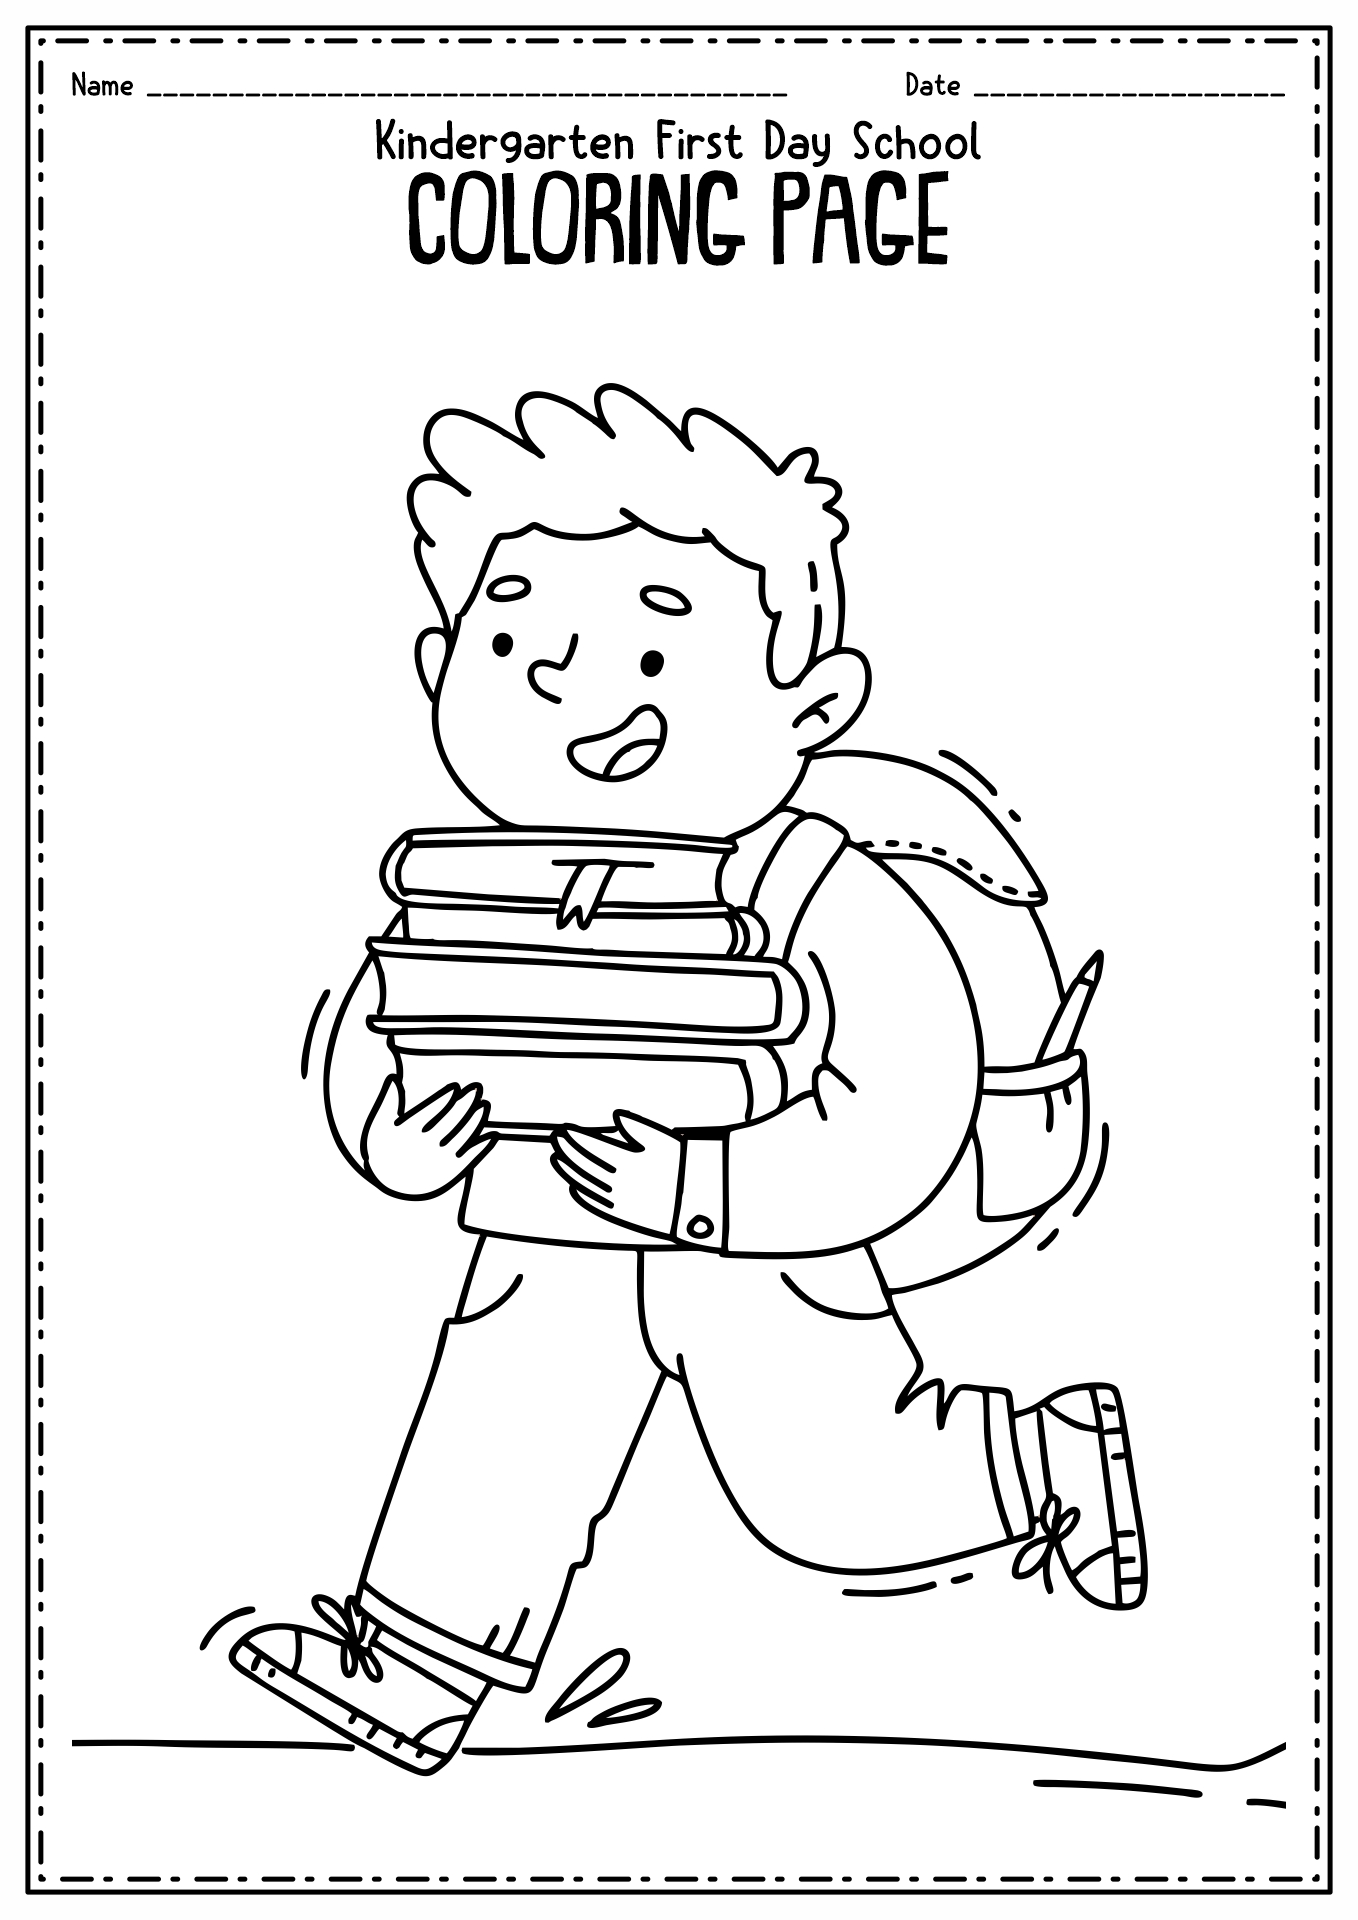 First Day of School Kindergarten Coloring Page Image